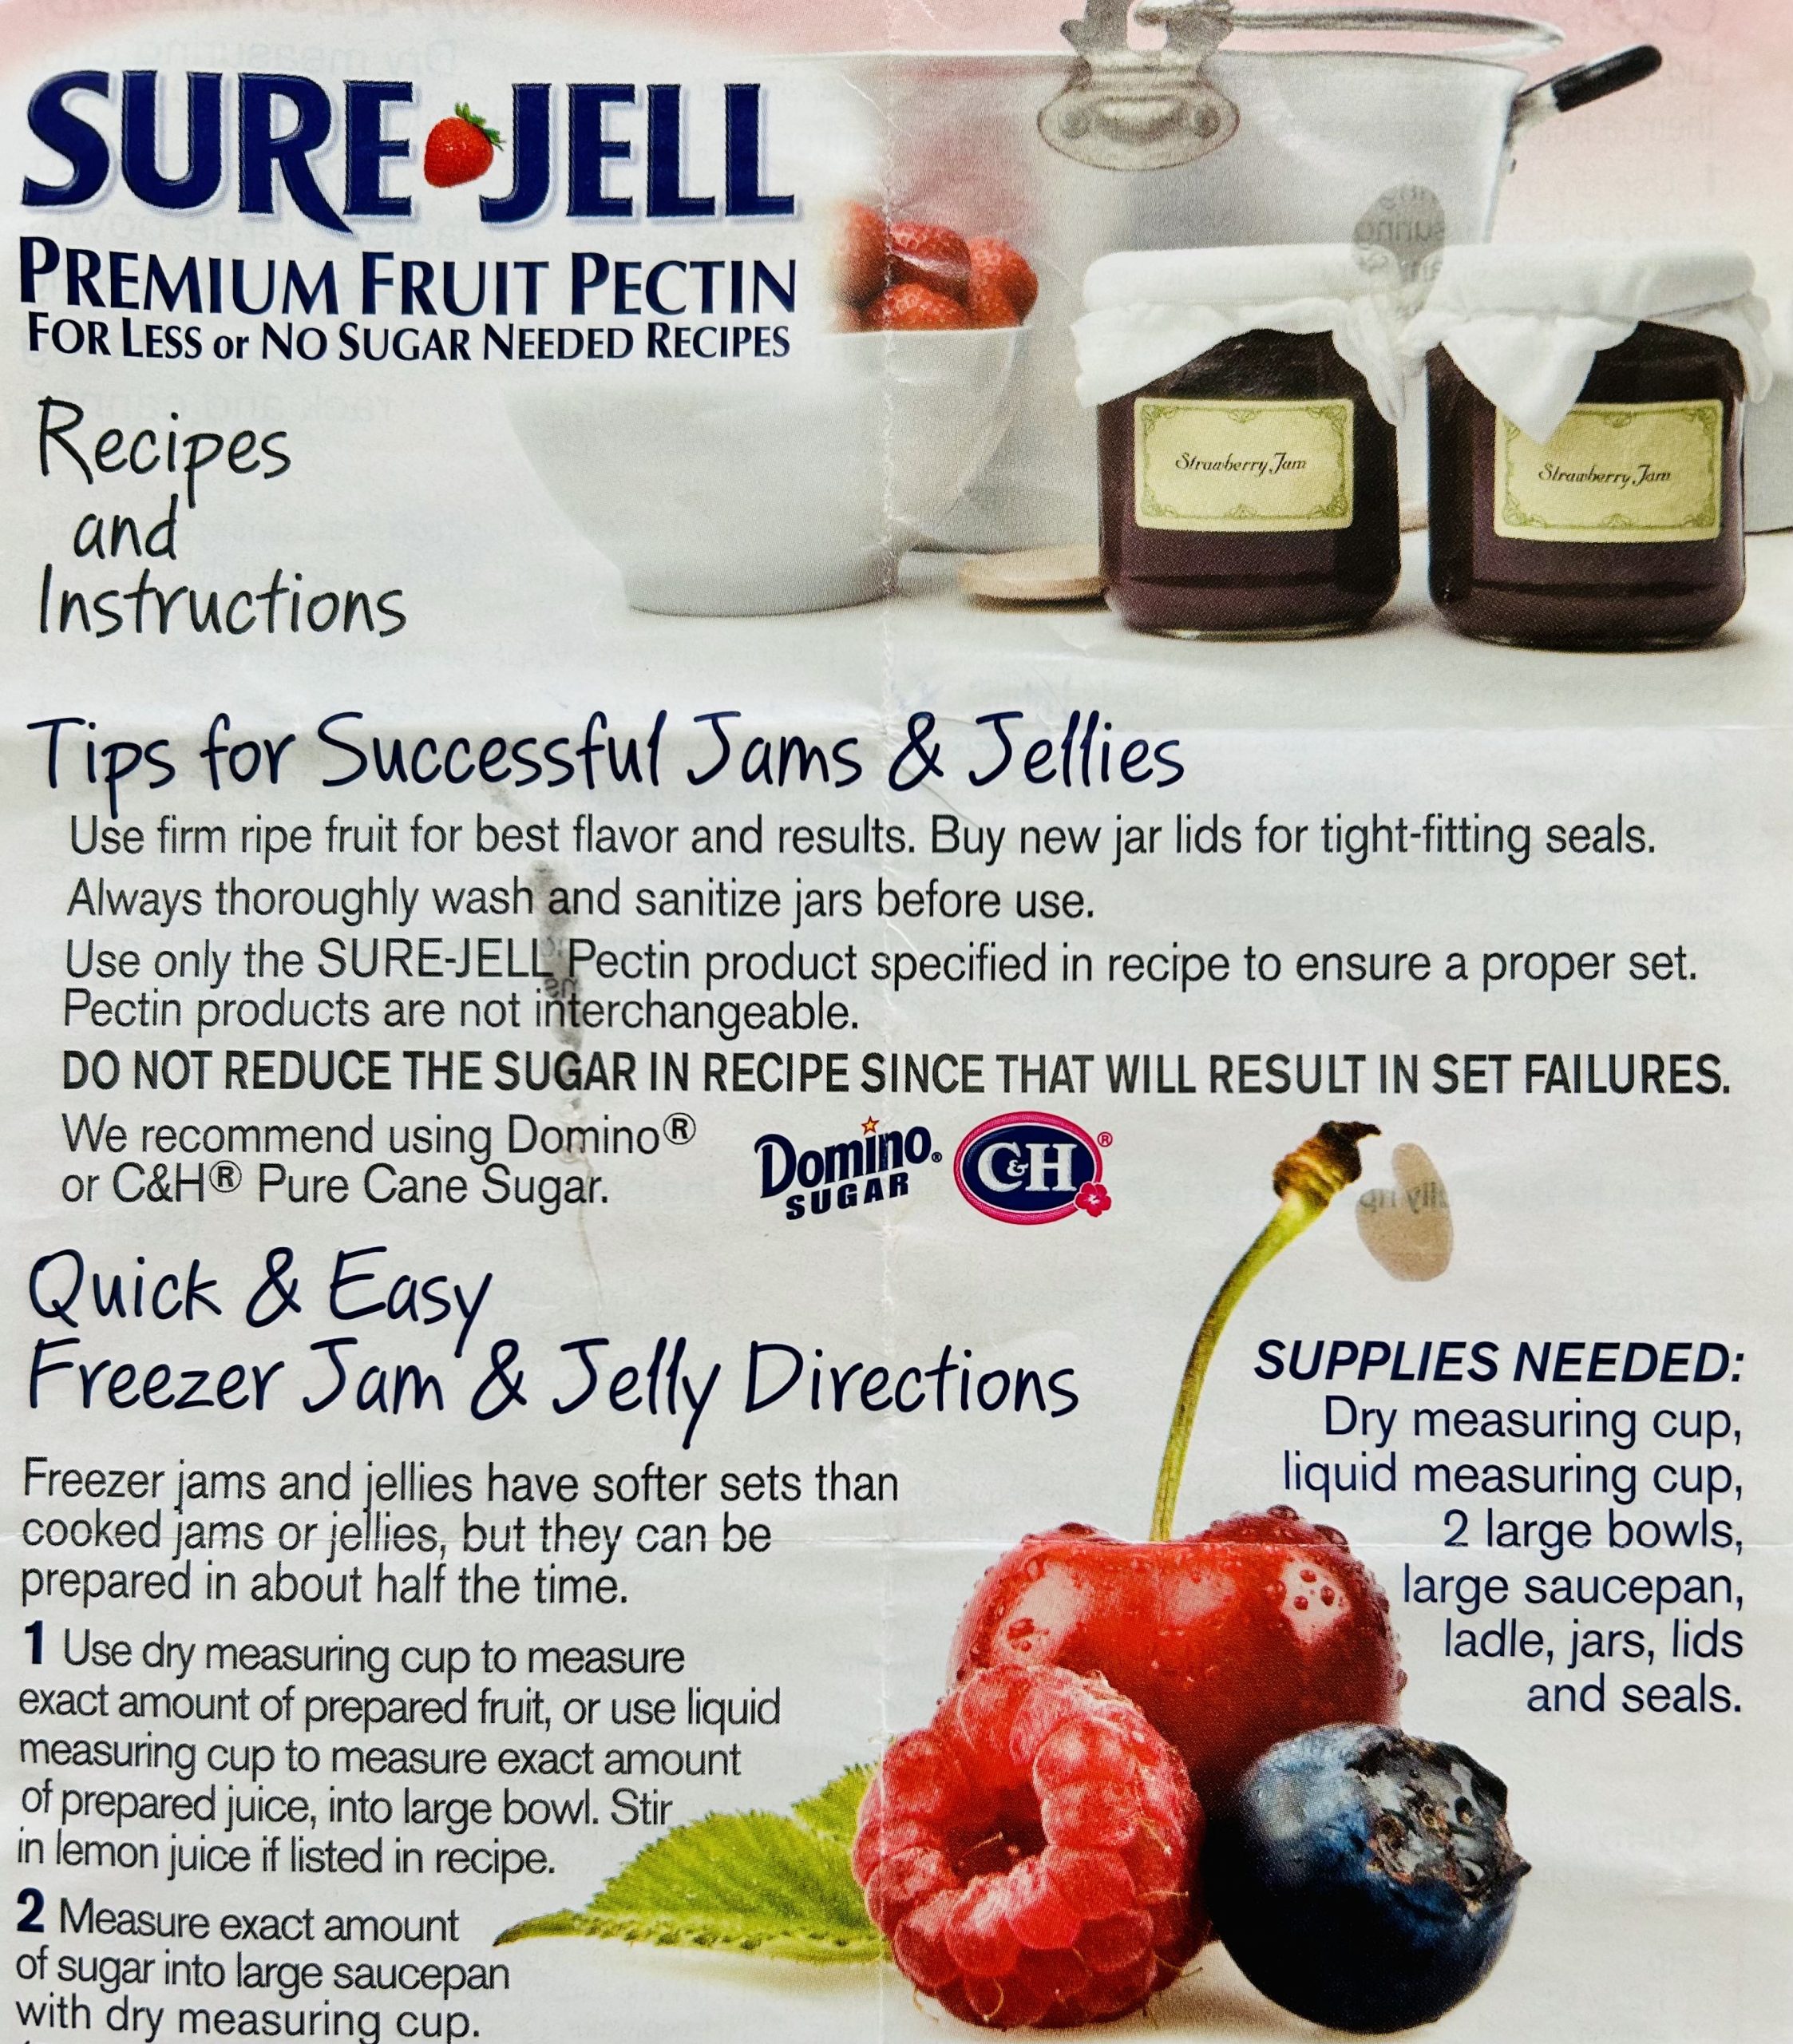 Rediscovering Sure-Jell for Less or No Sugar Needed Recipes: A Nostalgic Look at the Original Recipe Insert